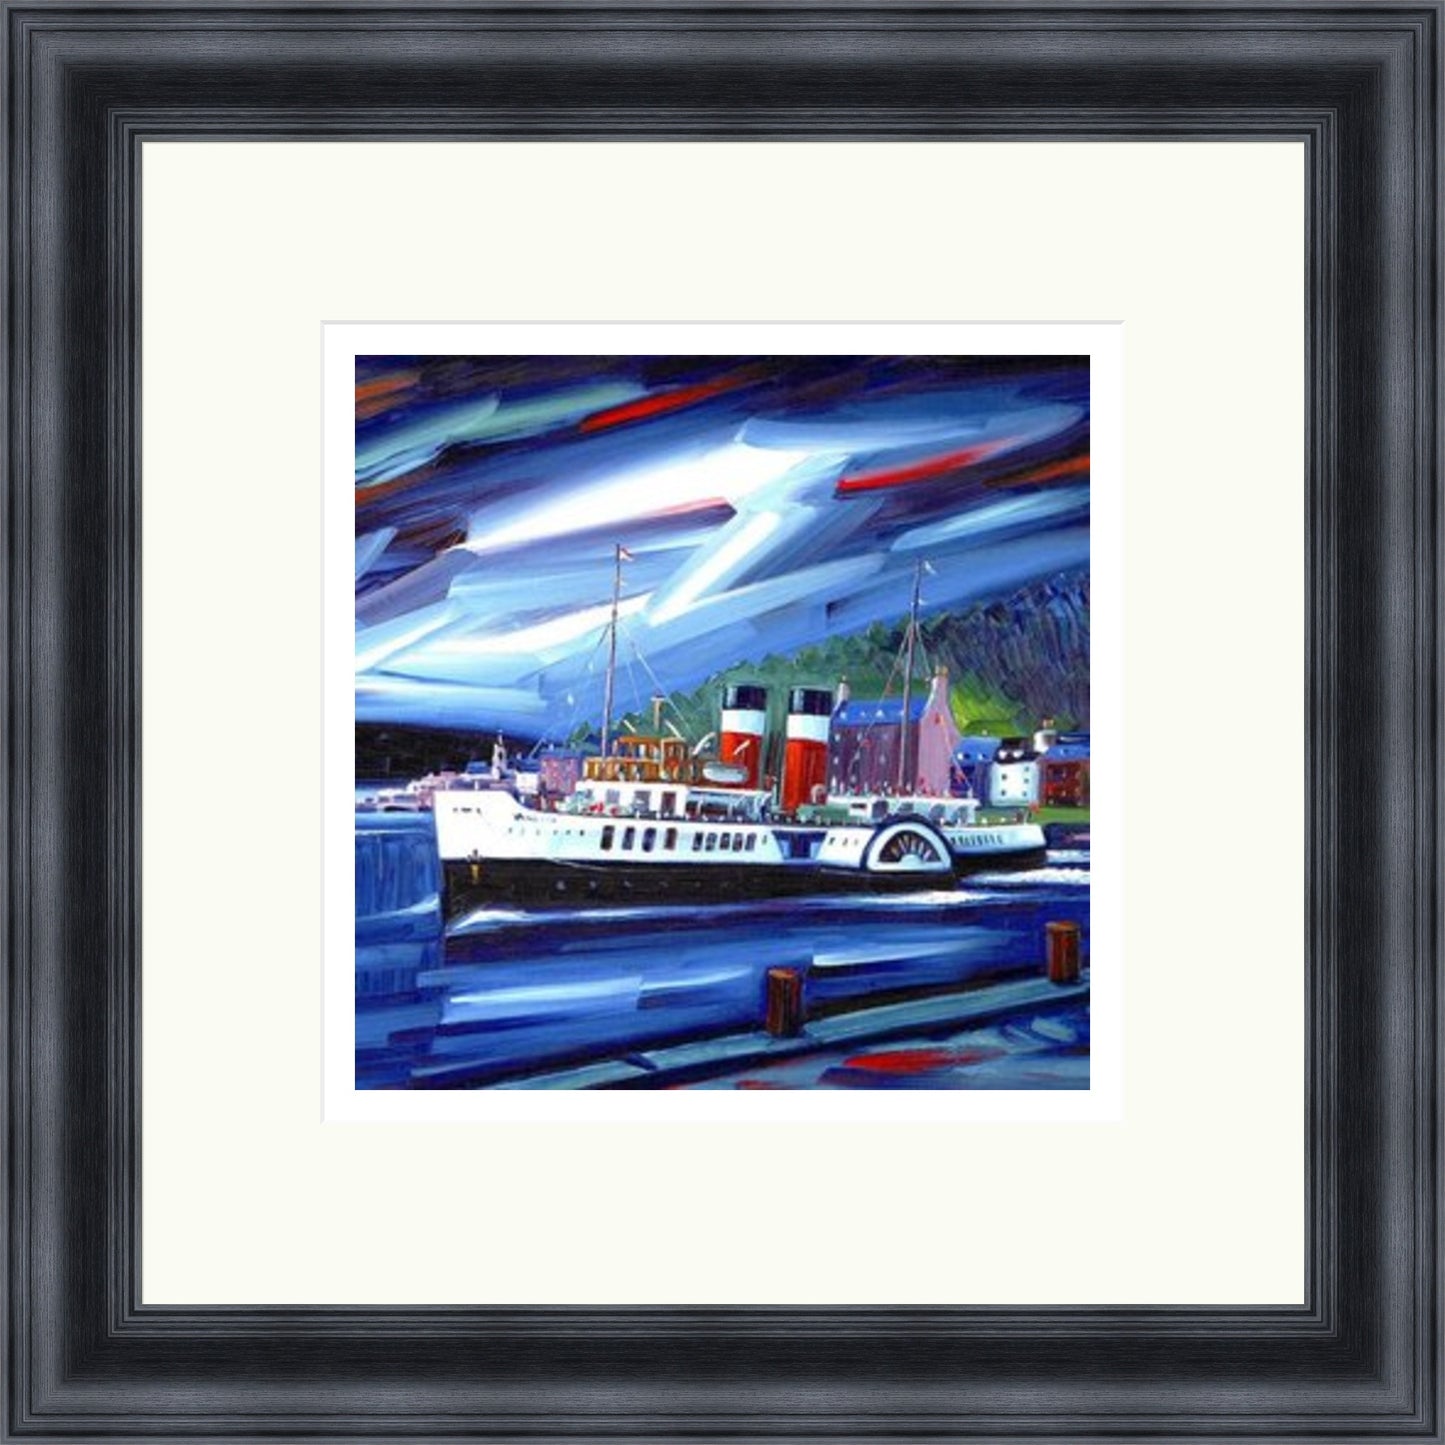 The Last Sea Going Paddle Steamer by Raymond Murray